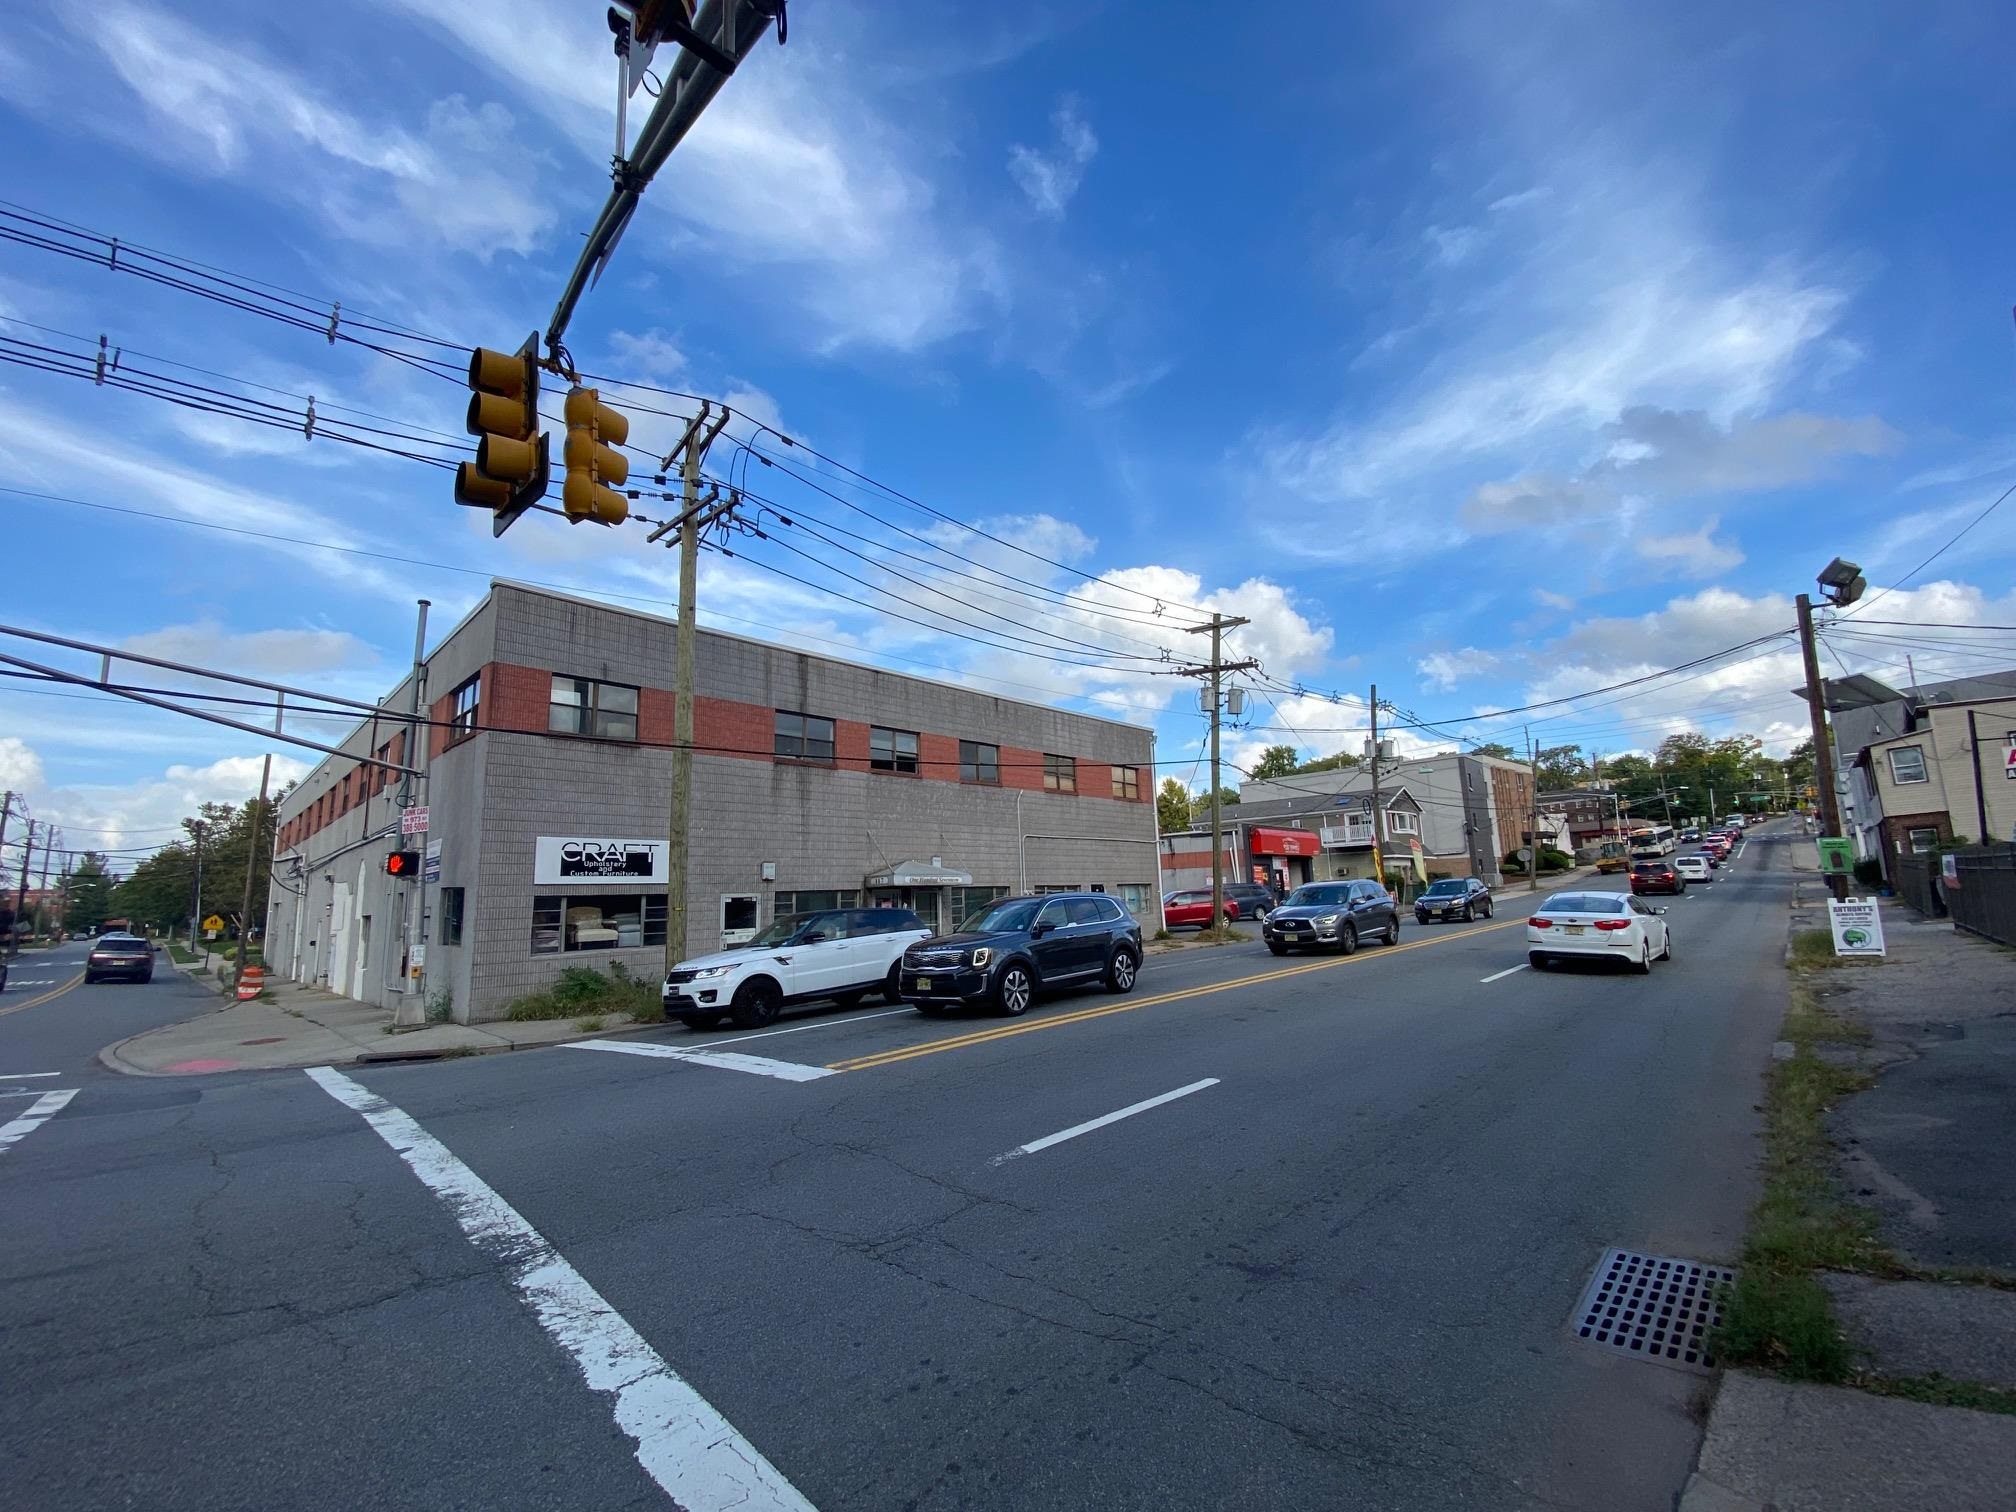 Mixed Use Flex Building in great location next to Over Peck County Park. Property contains Car Wash, Office and Industrial Space and includes private parking. Located 2 Miles from the George Washington Bridge and 1.5 Miles from the NJ Turnpike and Route 80 Intersection. This property sits across from a proposed Light Rail Stop with connection to Hoboken.